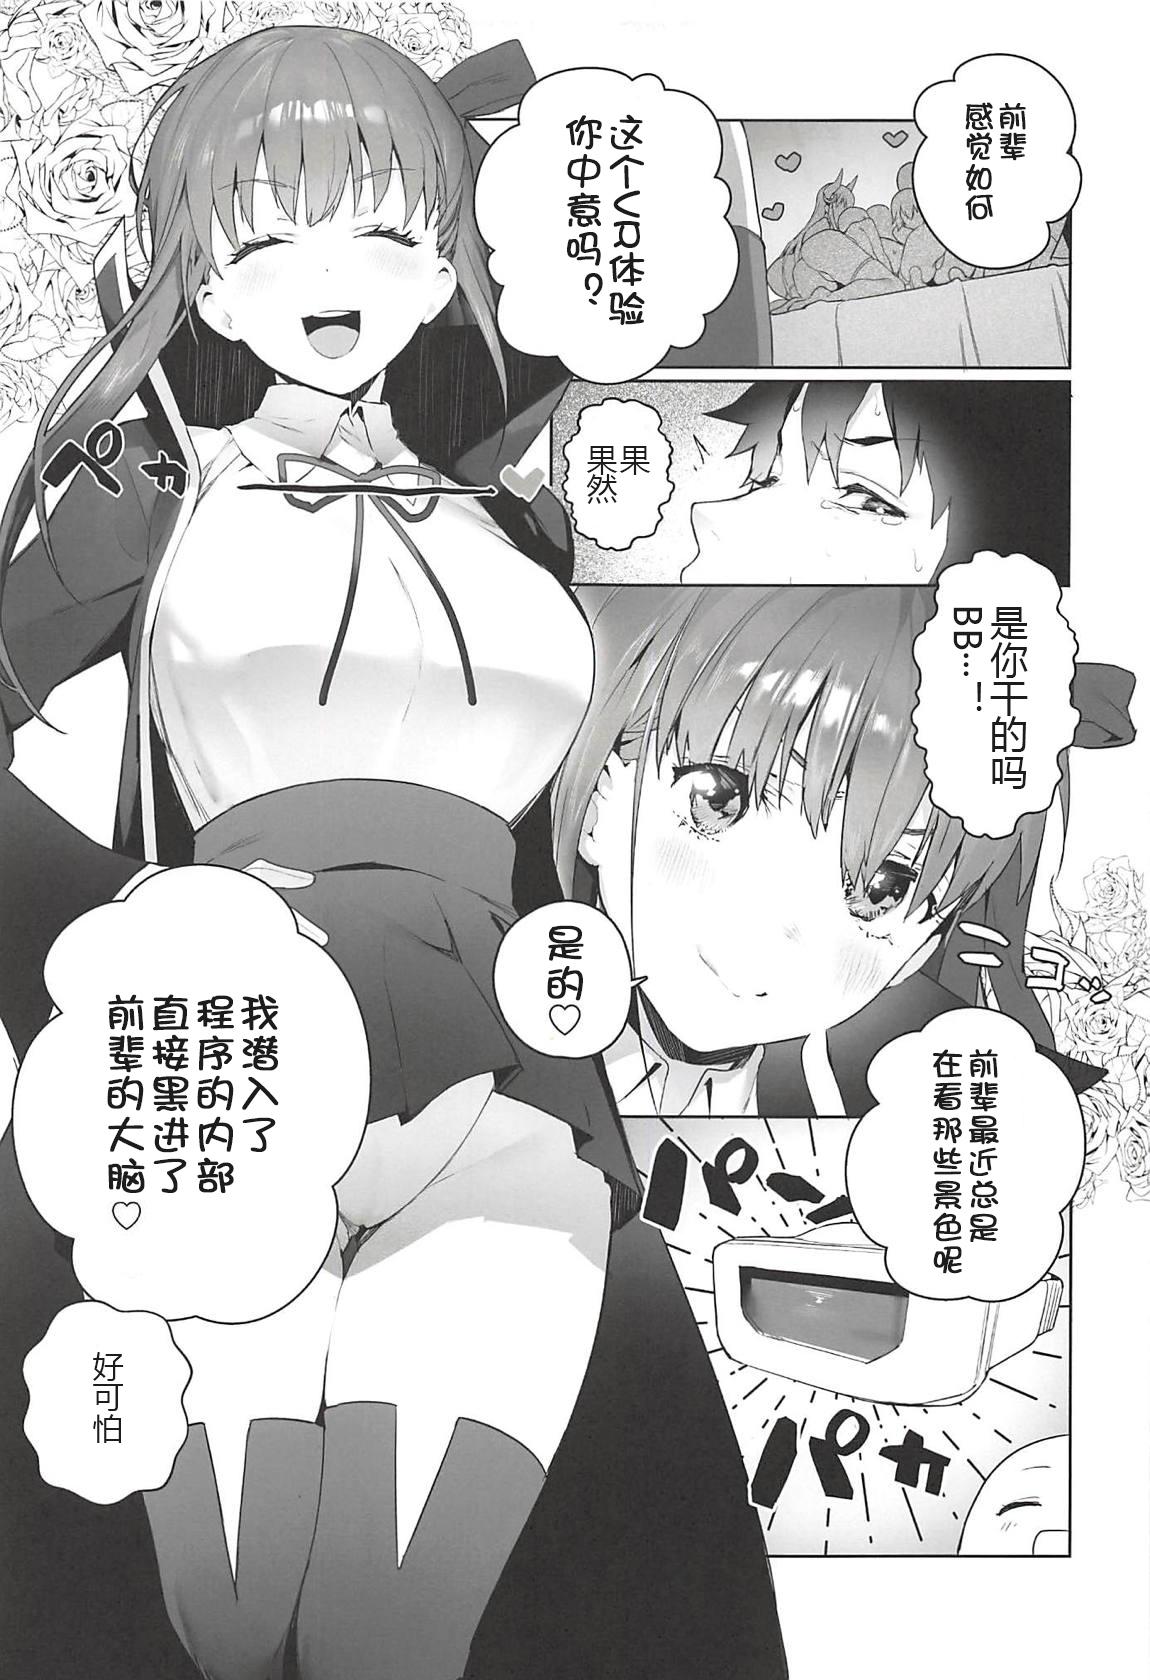 Ano LOVELESS - Fate grand order Gaysex - Page 5